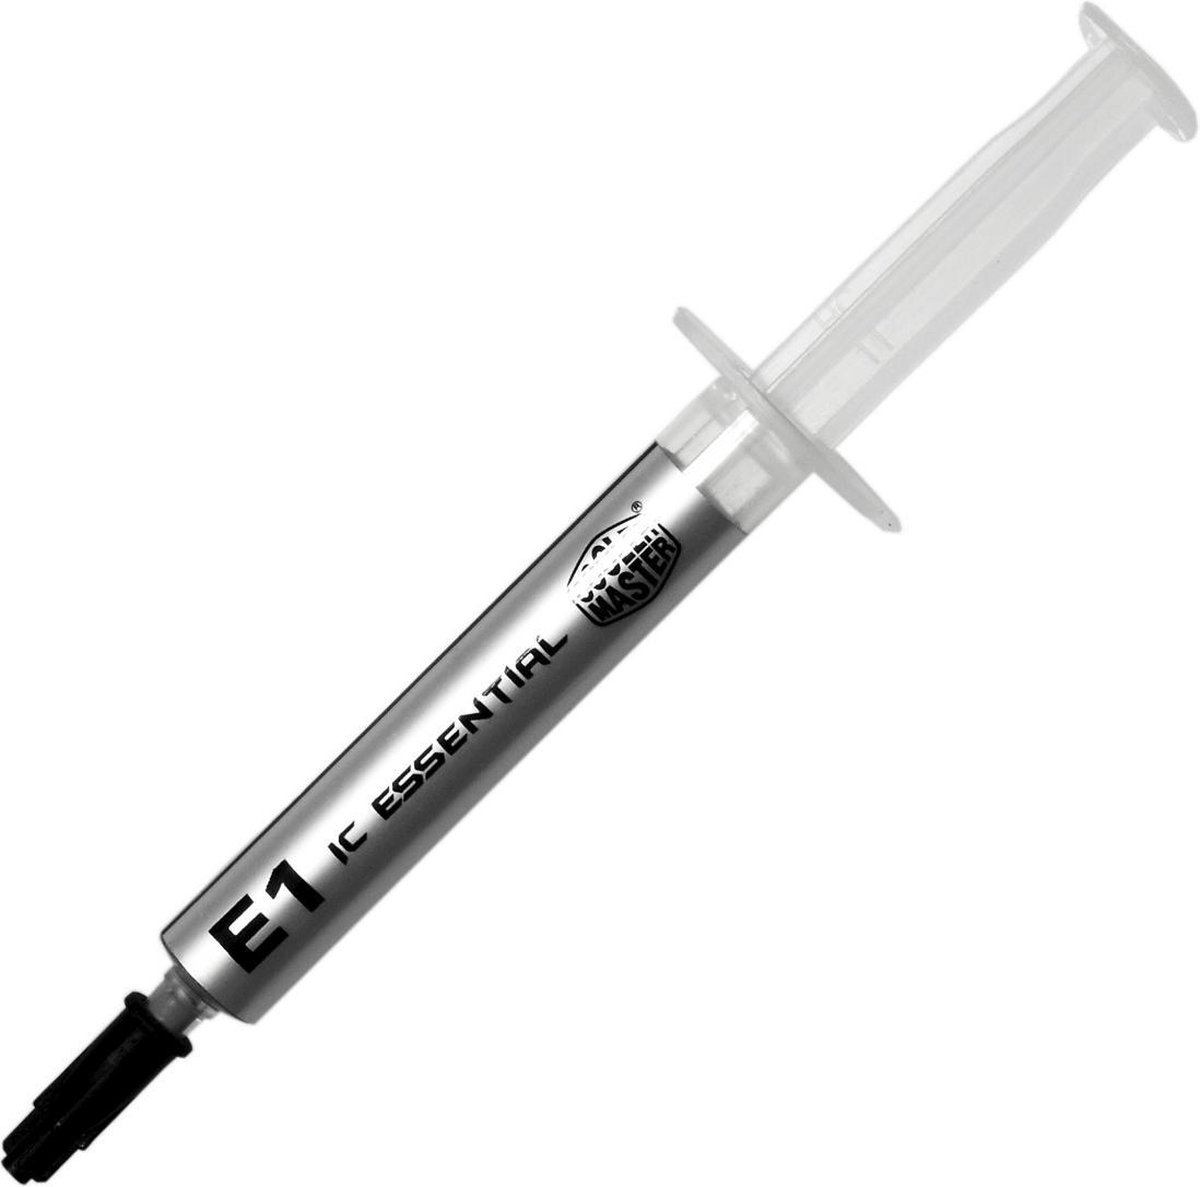 Cooler Master IC-Essential E1 thermal grease Grey - Cooler Master